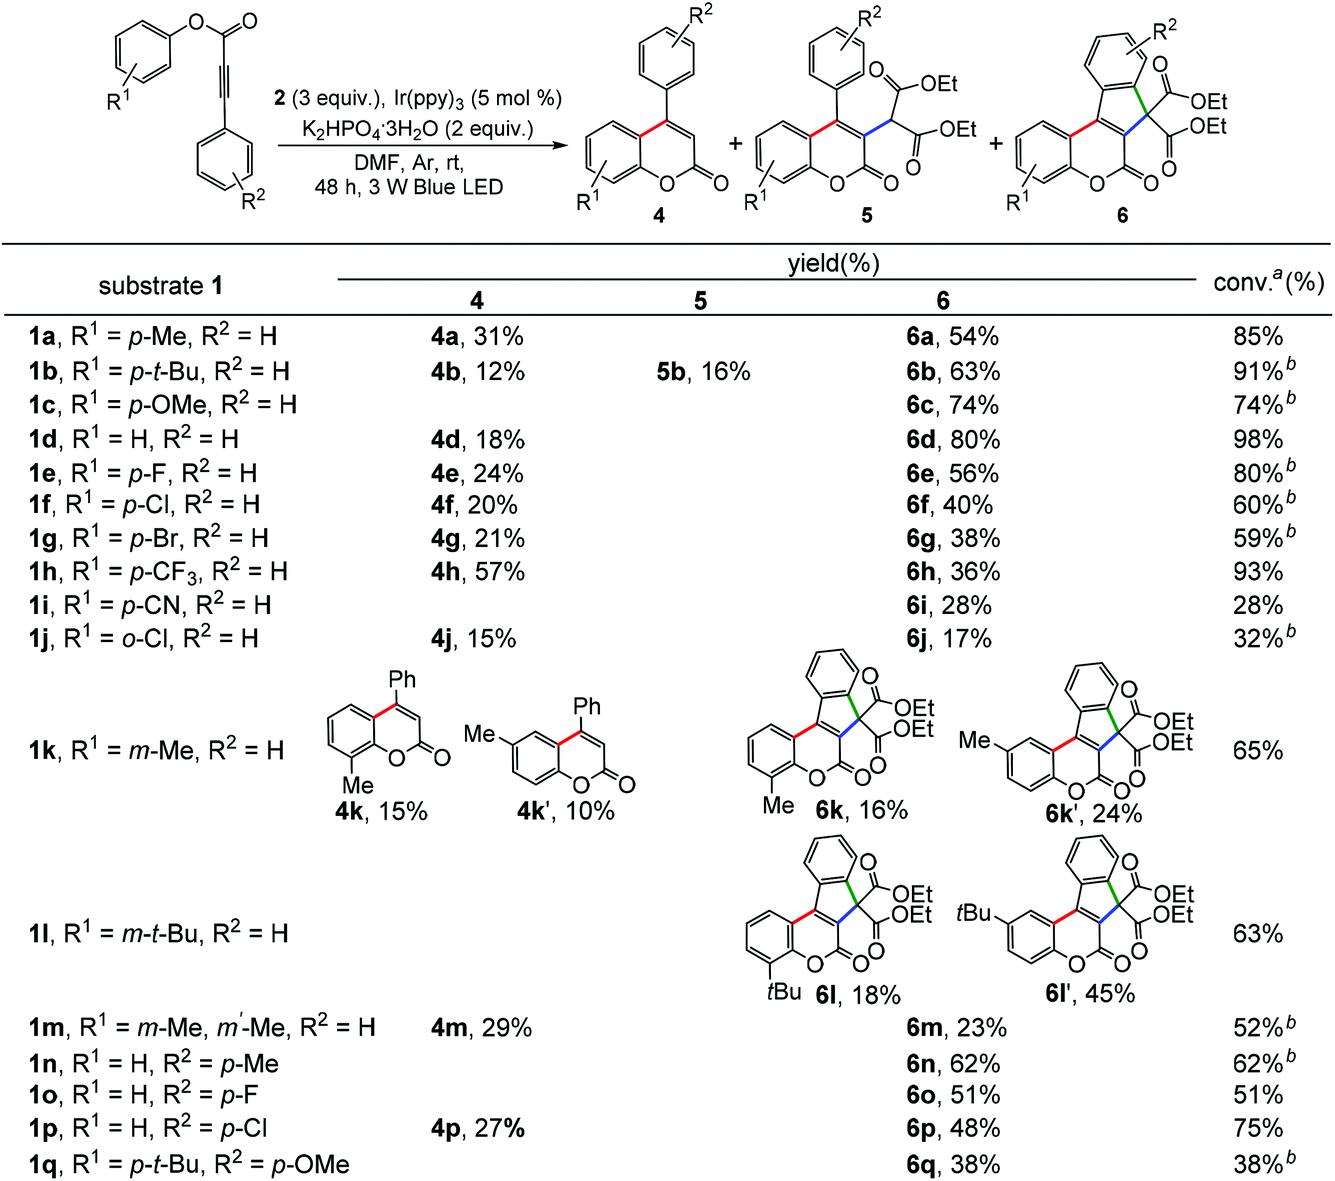 A Simple Approach To Indeno Coumarins Via Visible Light Induced Cyclization Of Aryl Alkynoates With Diethyl Bromomalonate Organic Chemistry Frontiers Rsc Publishing Doi 10 1039 C9qod